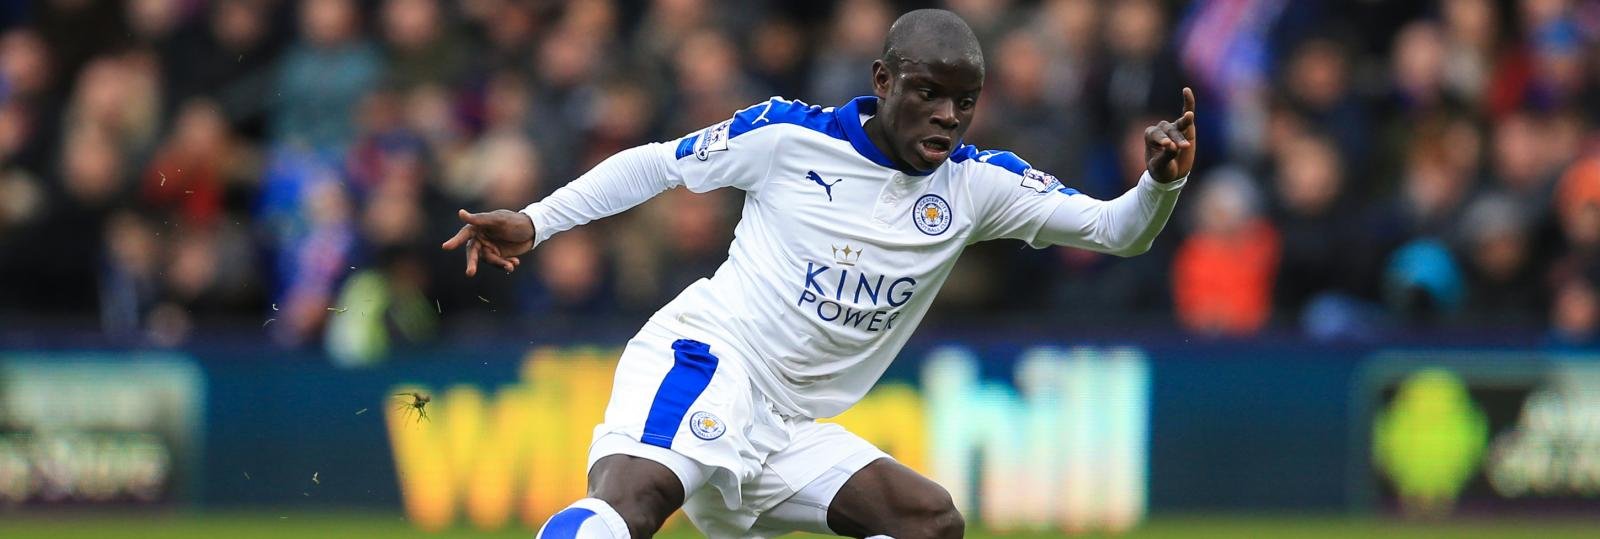 Manchester United plot £30m raid to beat Manchester City and Arsenal to Leicester City ace